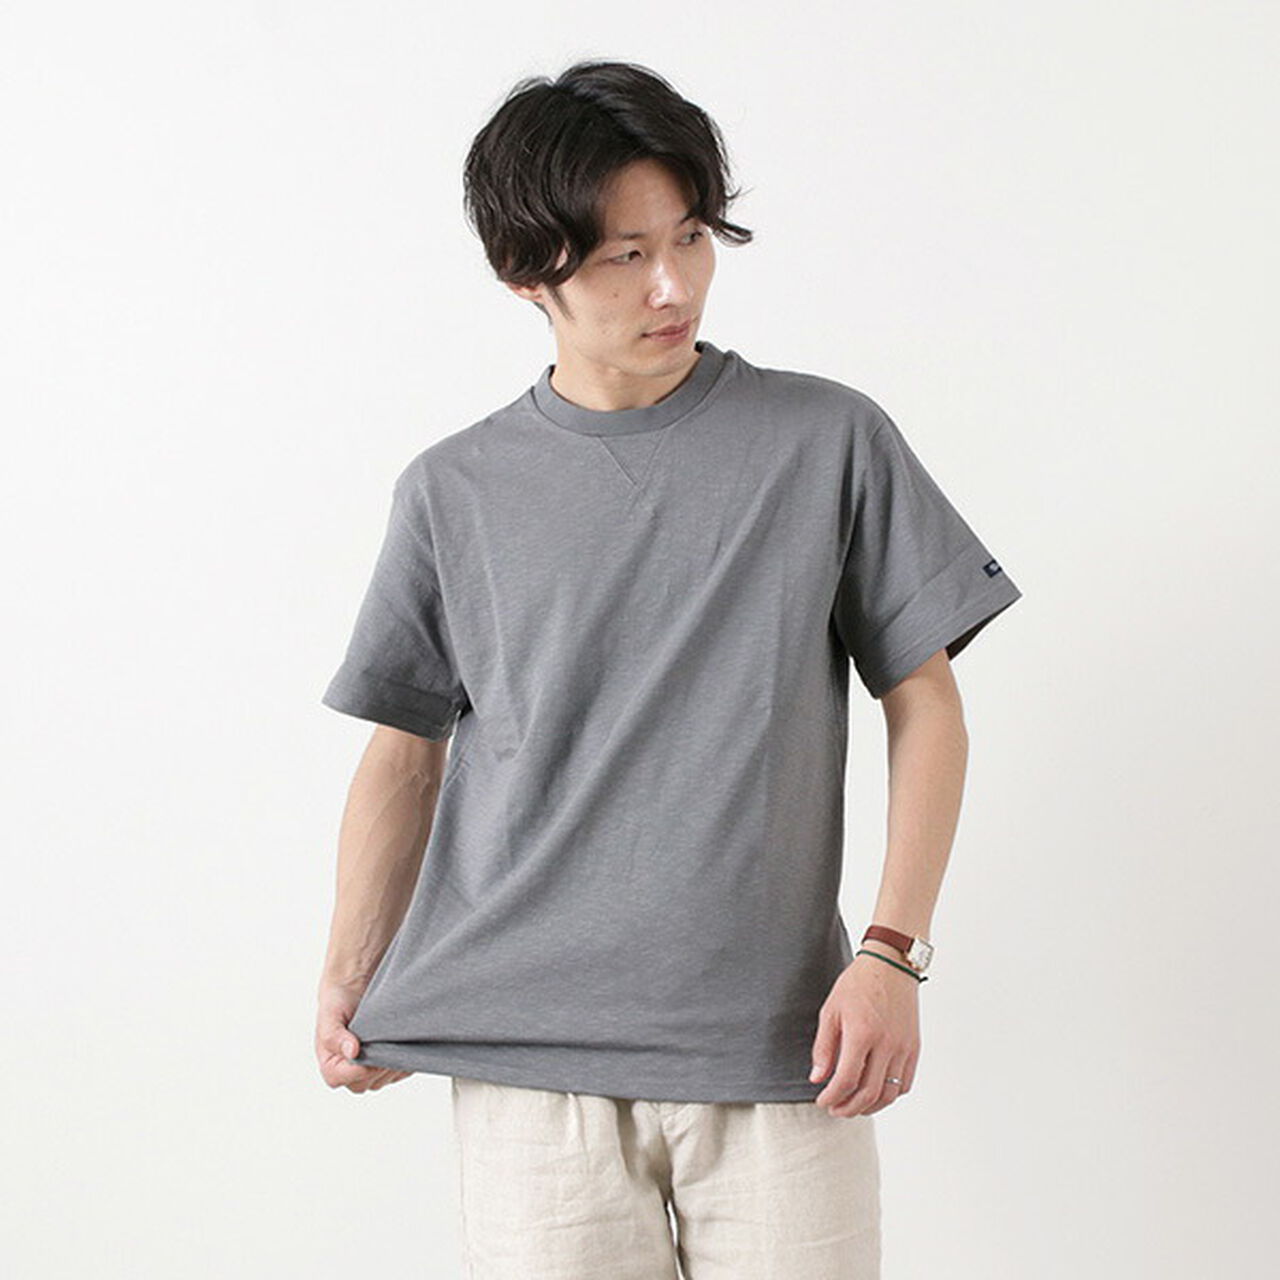 TE001SS HDCS Light Gusseted Crew T-Shirt,DeanGrey, large image number 0